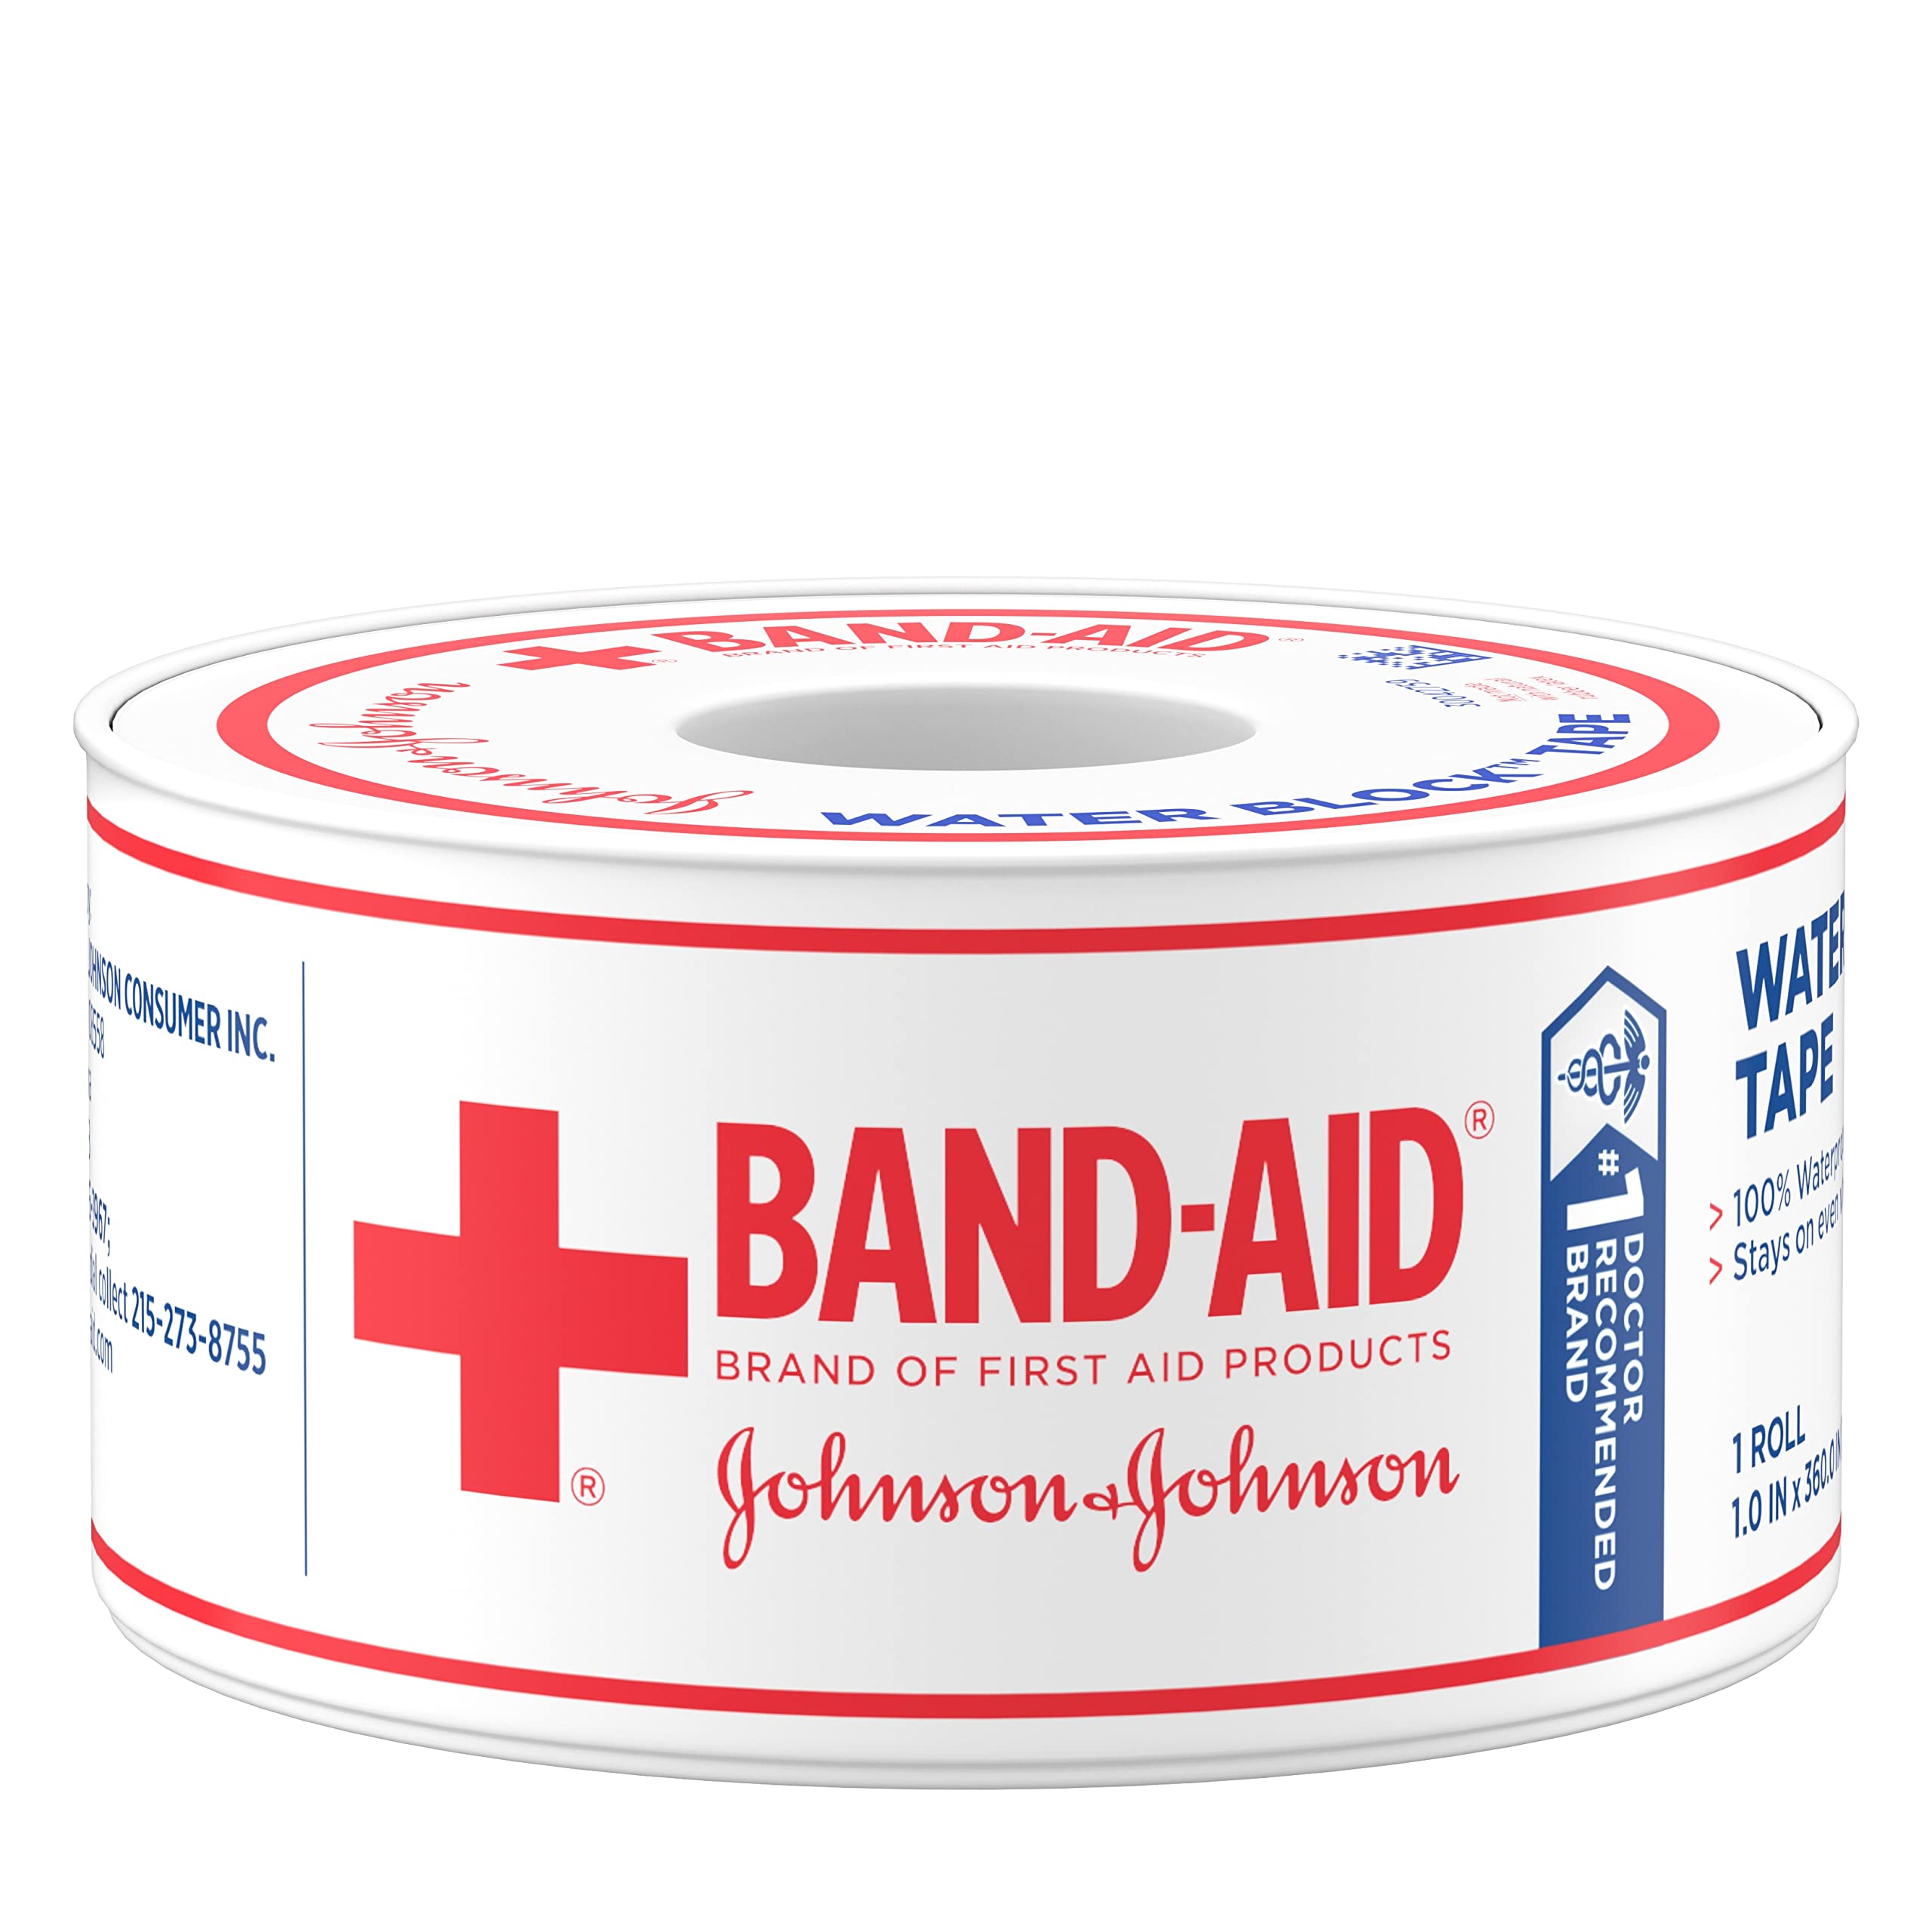 Band-Aid Brand First Aid Water Block 100% Waterproof Self-Adhesive Tape Roll for Durable Wound Care to Firmly Secure Bandages, 1 in by 10 yd